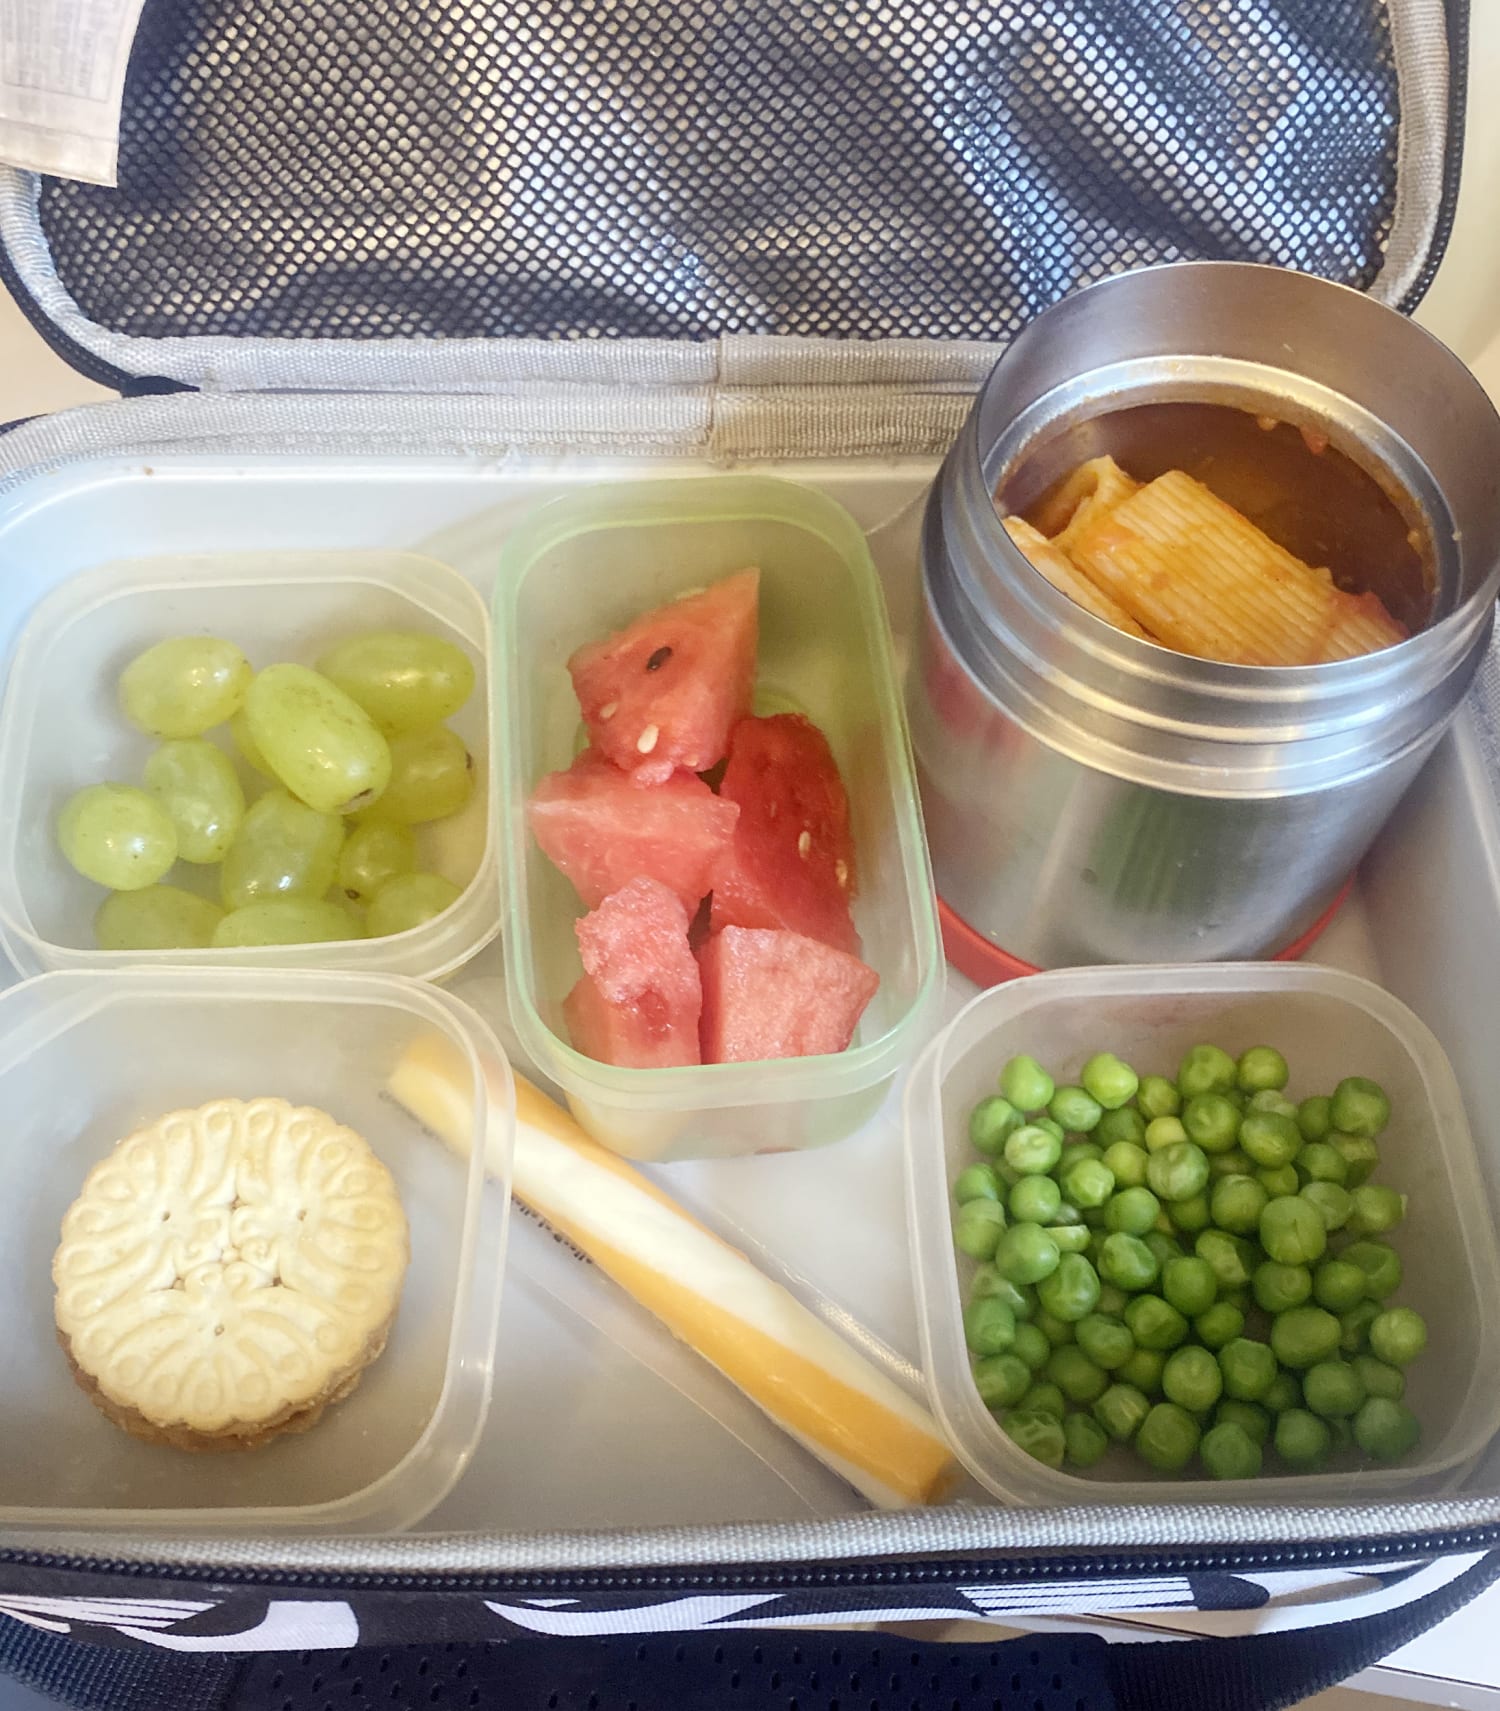 The Verdict on Packed School Lunches: Parents vs Kids